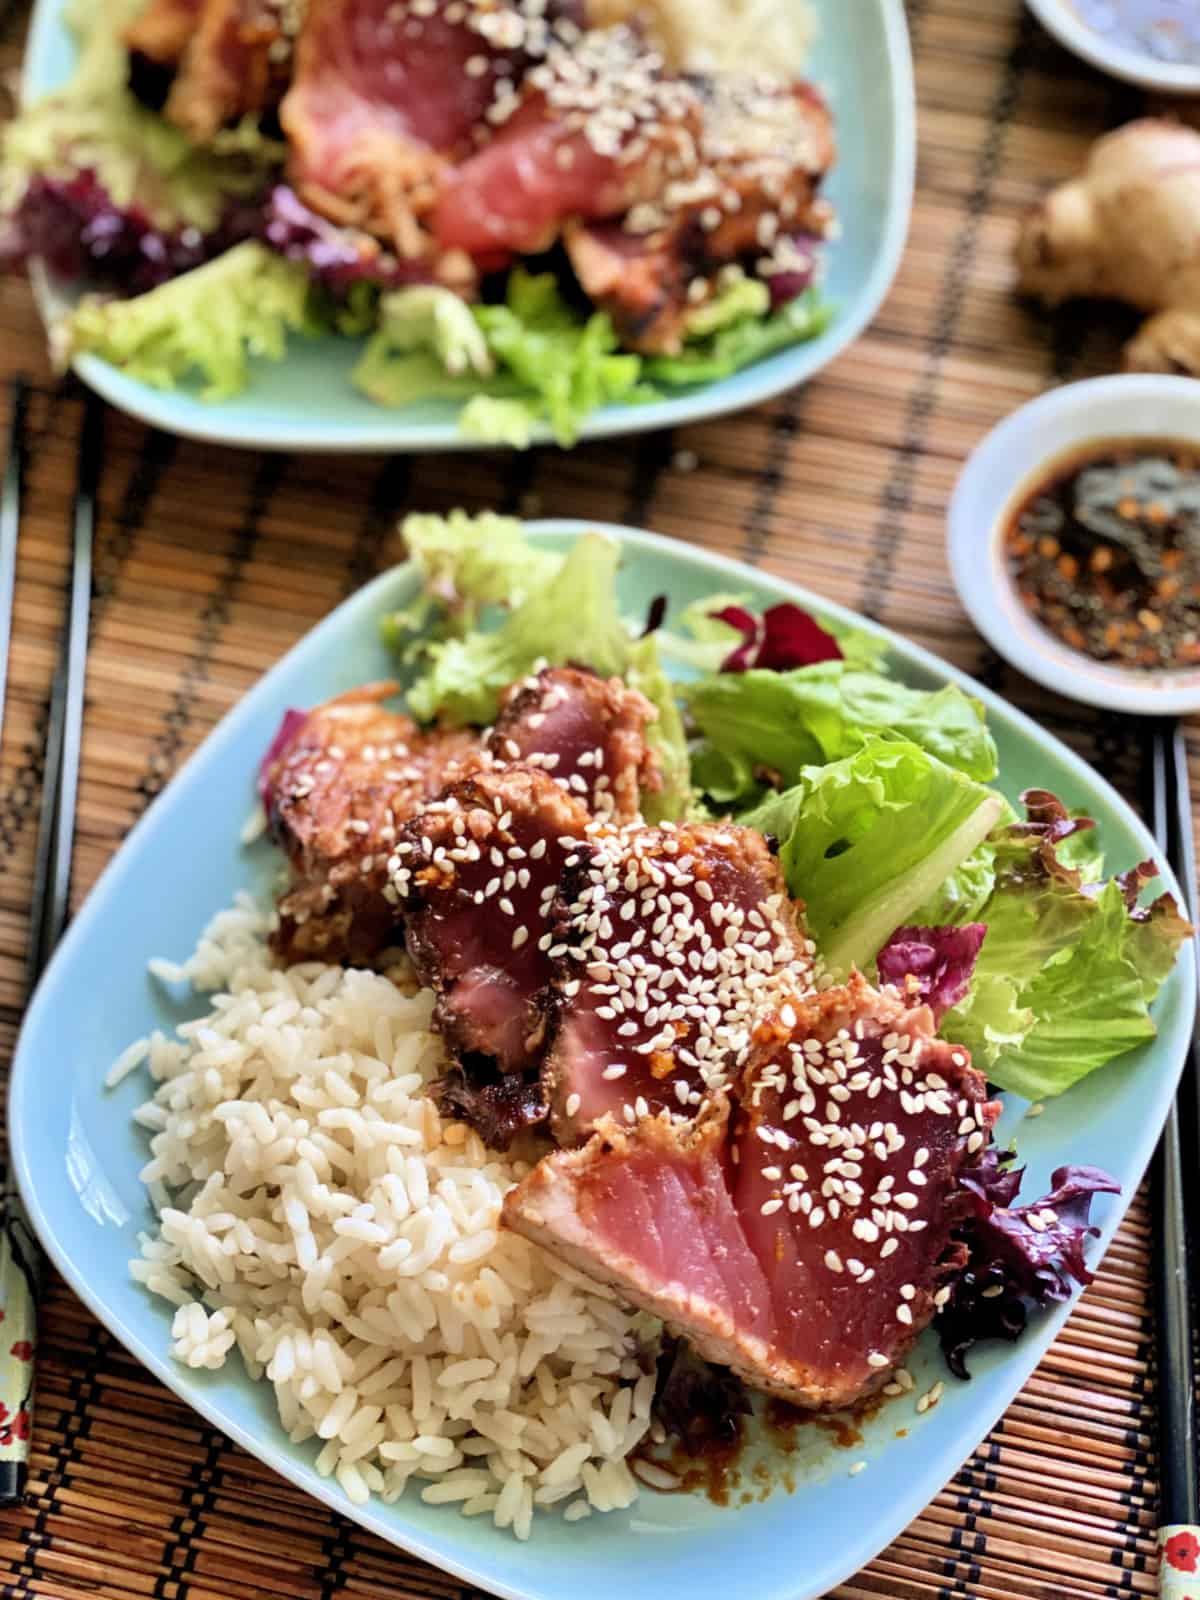 Top view of a blue plate with white rice and salad on it with seared sliced tuna on top.